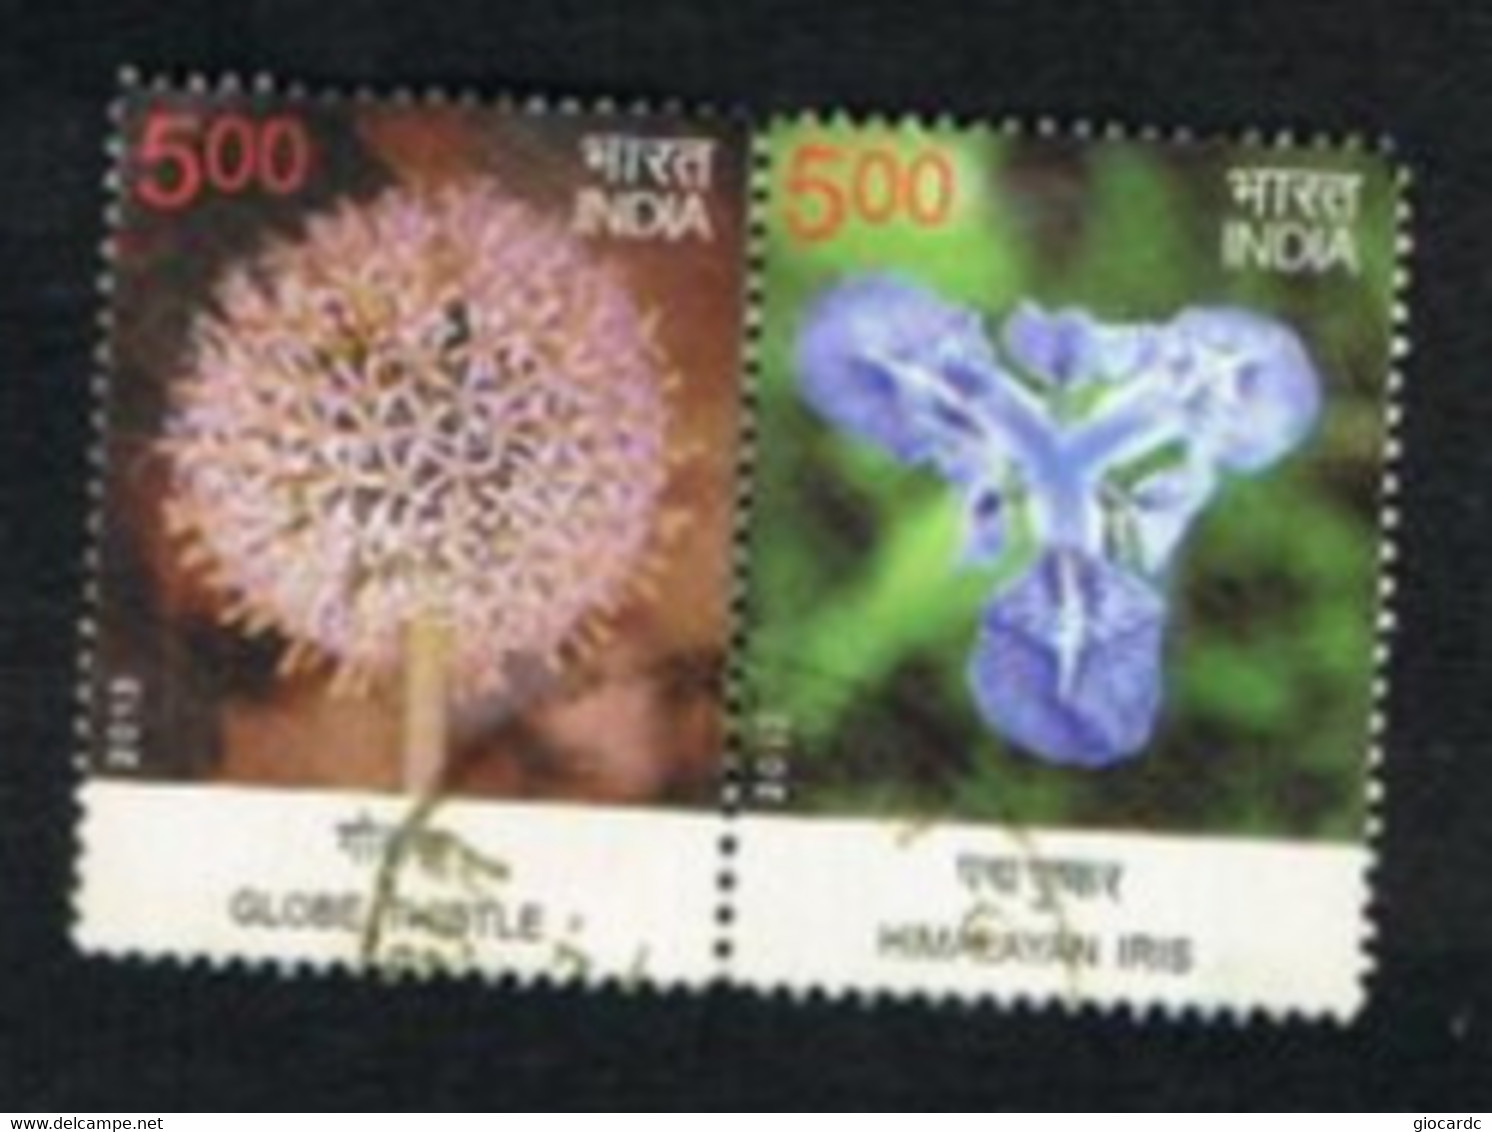 INDIA  - SG 2955.2956  - 2013 FLOWERS (2 STAMPS SE-TENANT)  -   USED - Used Stamps